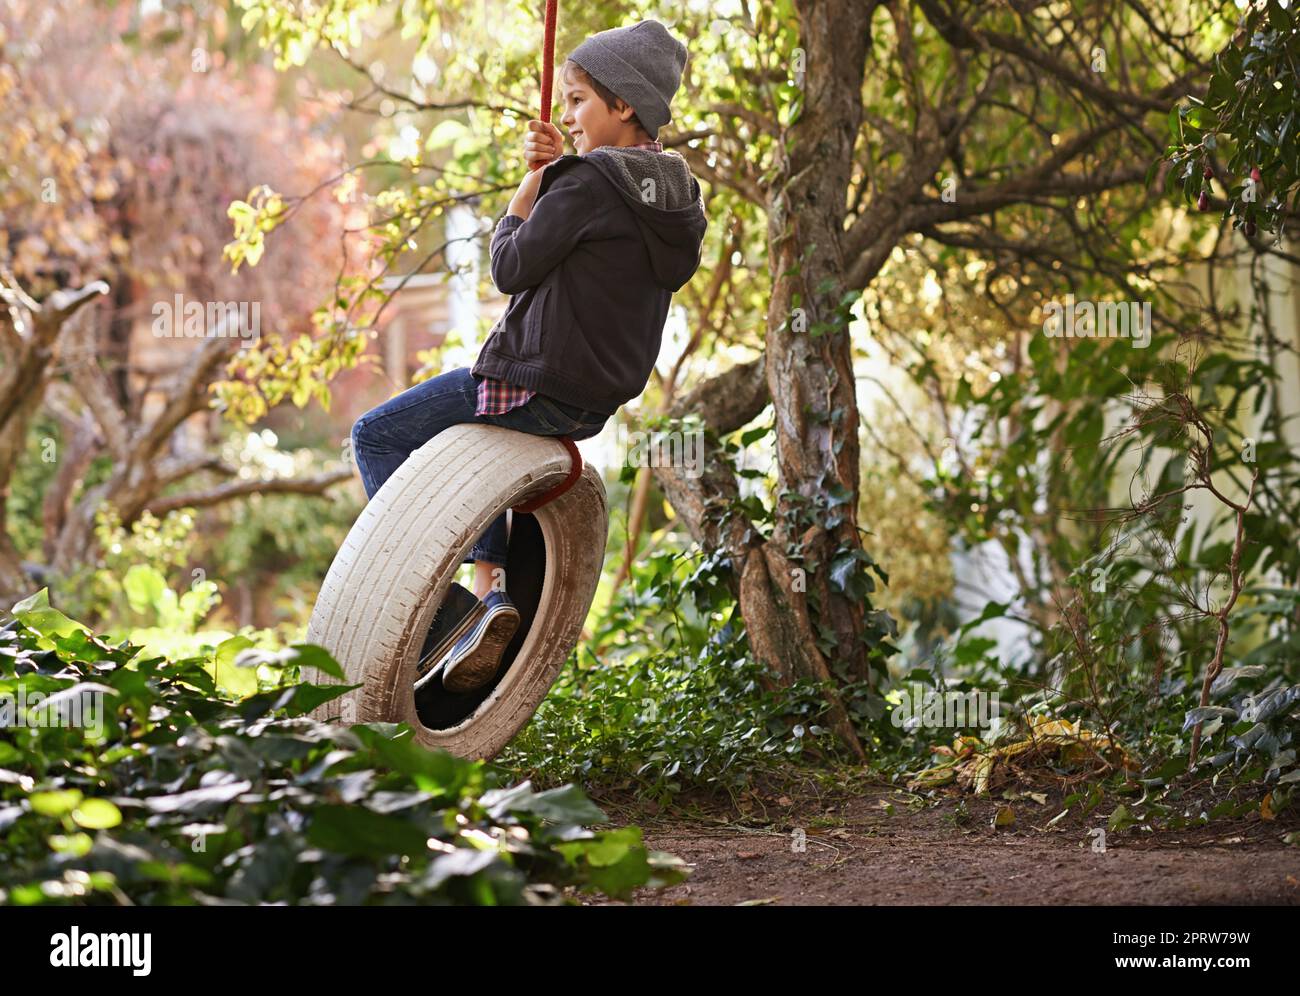 Carefree summer days of an idyllic childhood. A preteen boy swinging on a tyre swing in the garden. Stock Photo